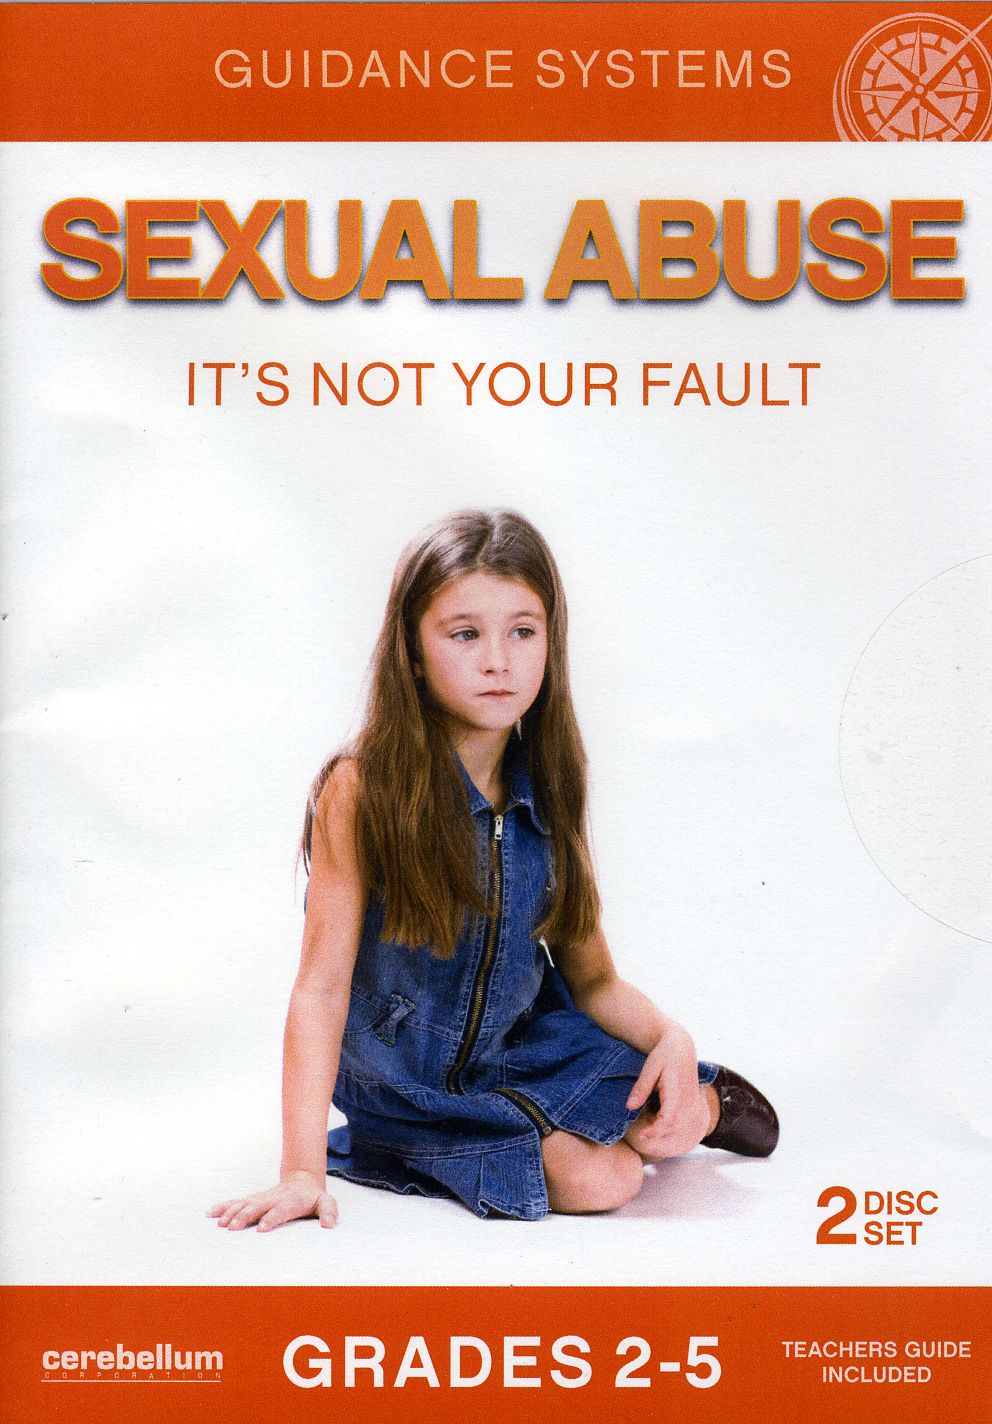 SEXUAL ABUSE: IT'S NOT YOUR FAULT